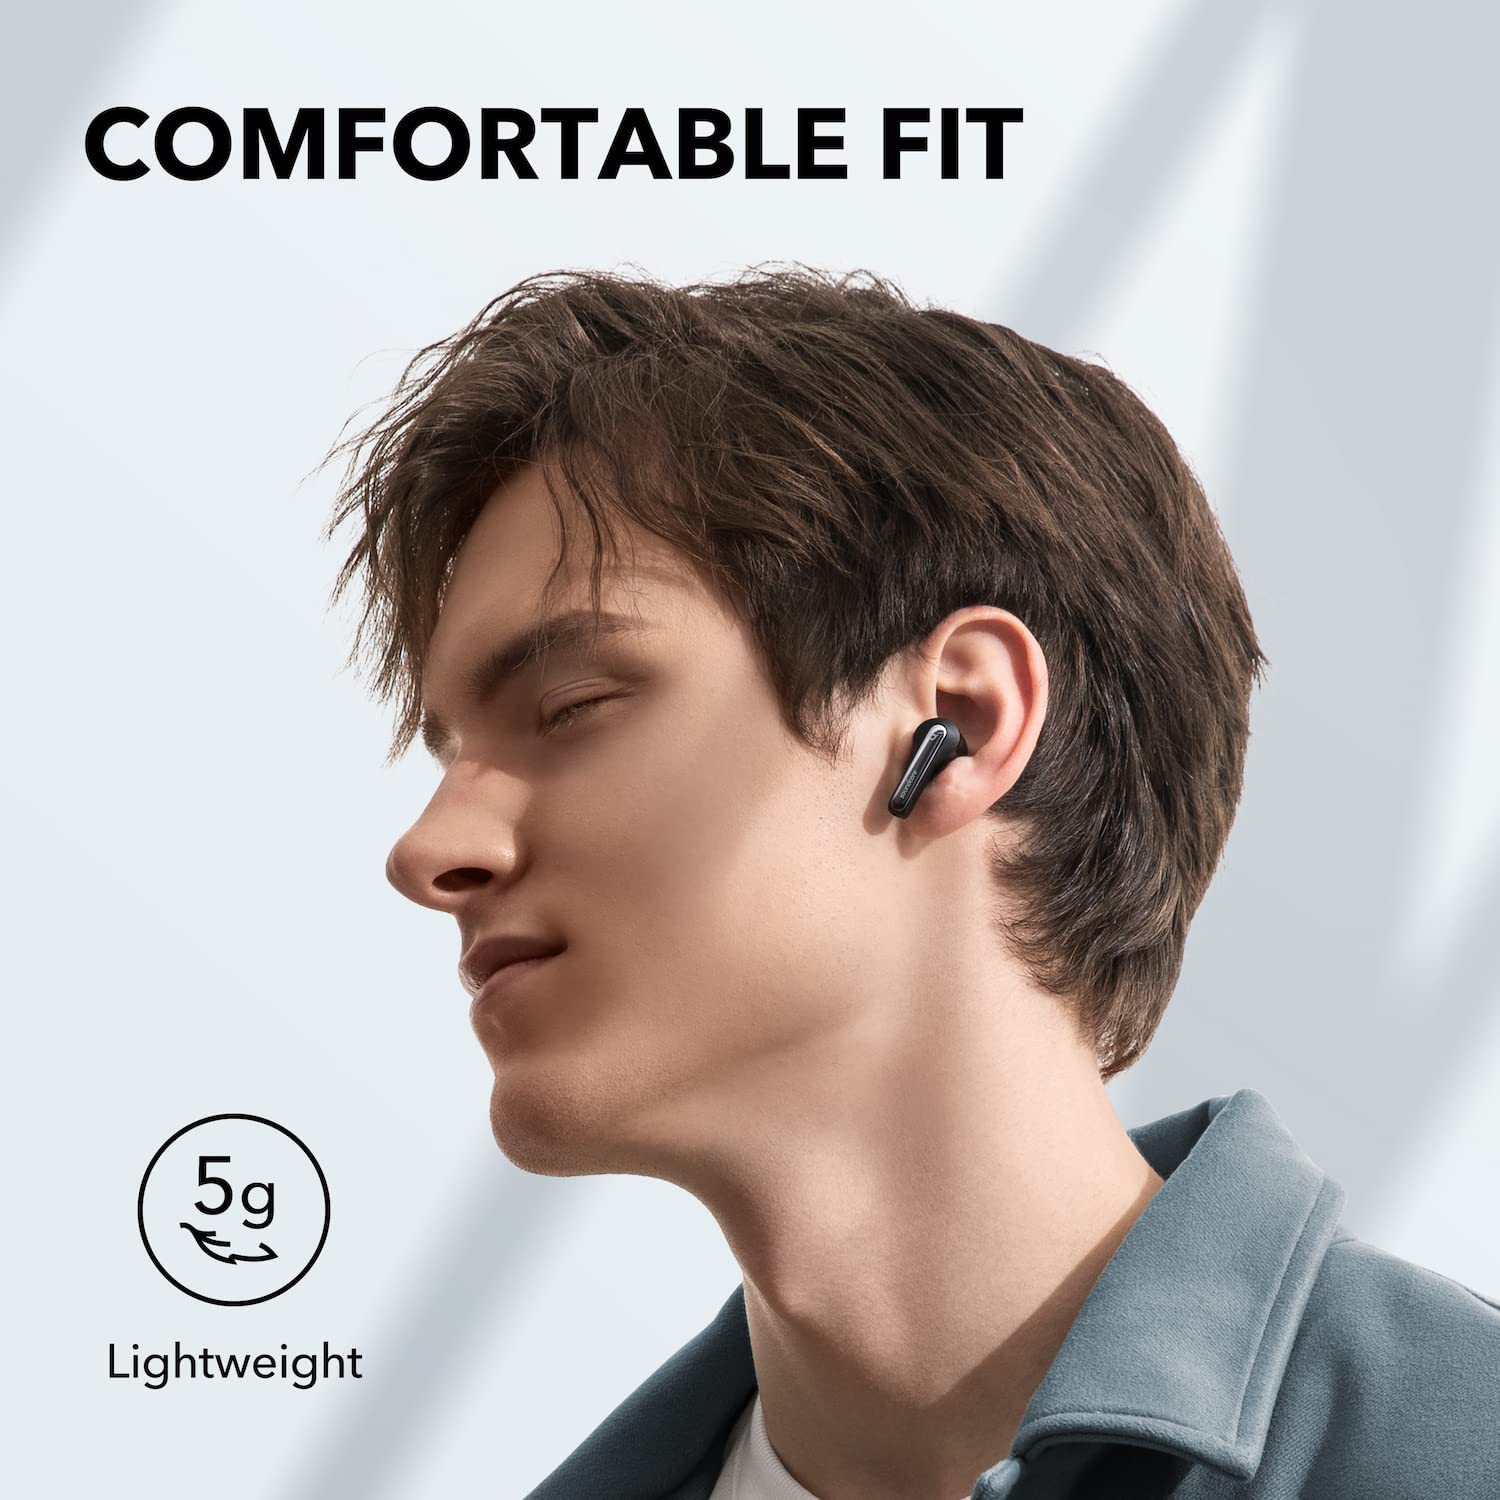 Soundcore Life P3i Hybrid Active Noise Cancelling Earbuds ,4 Mics, Custom EQ,6H Playtime,Black - image 4 of 7